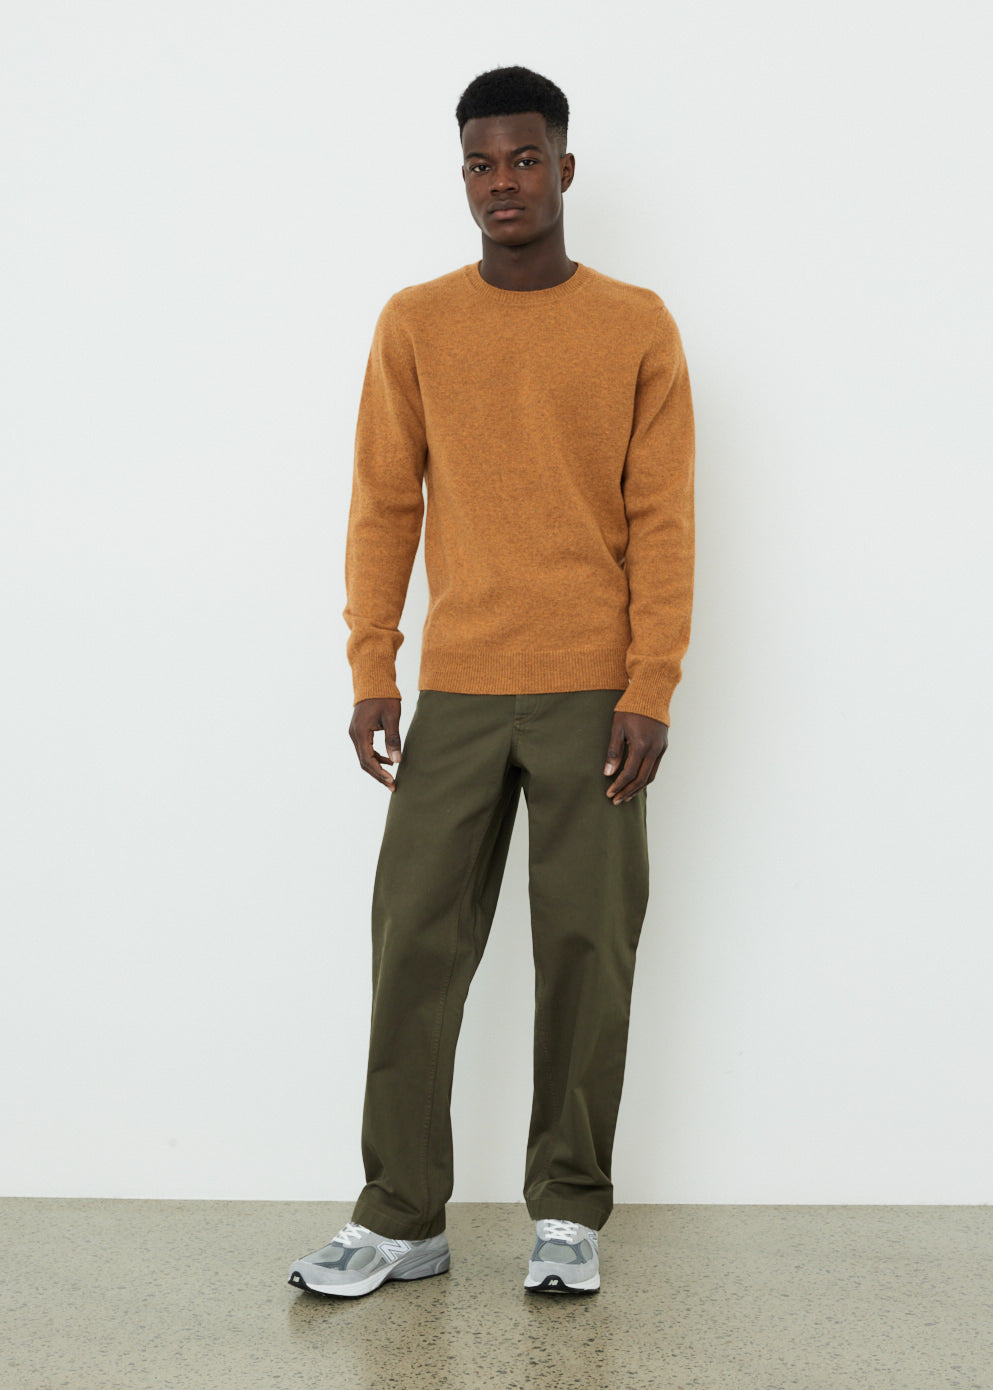 Sigfred Lambswool Knit